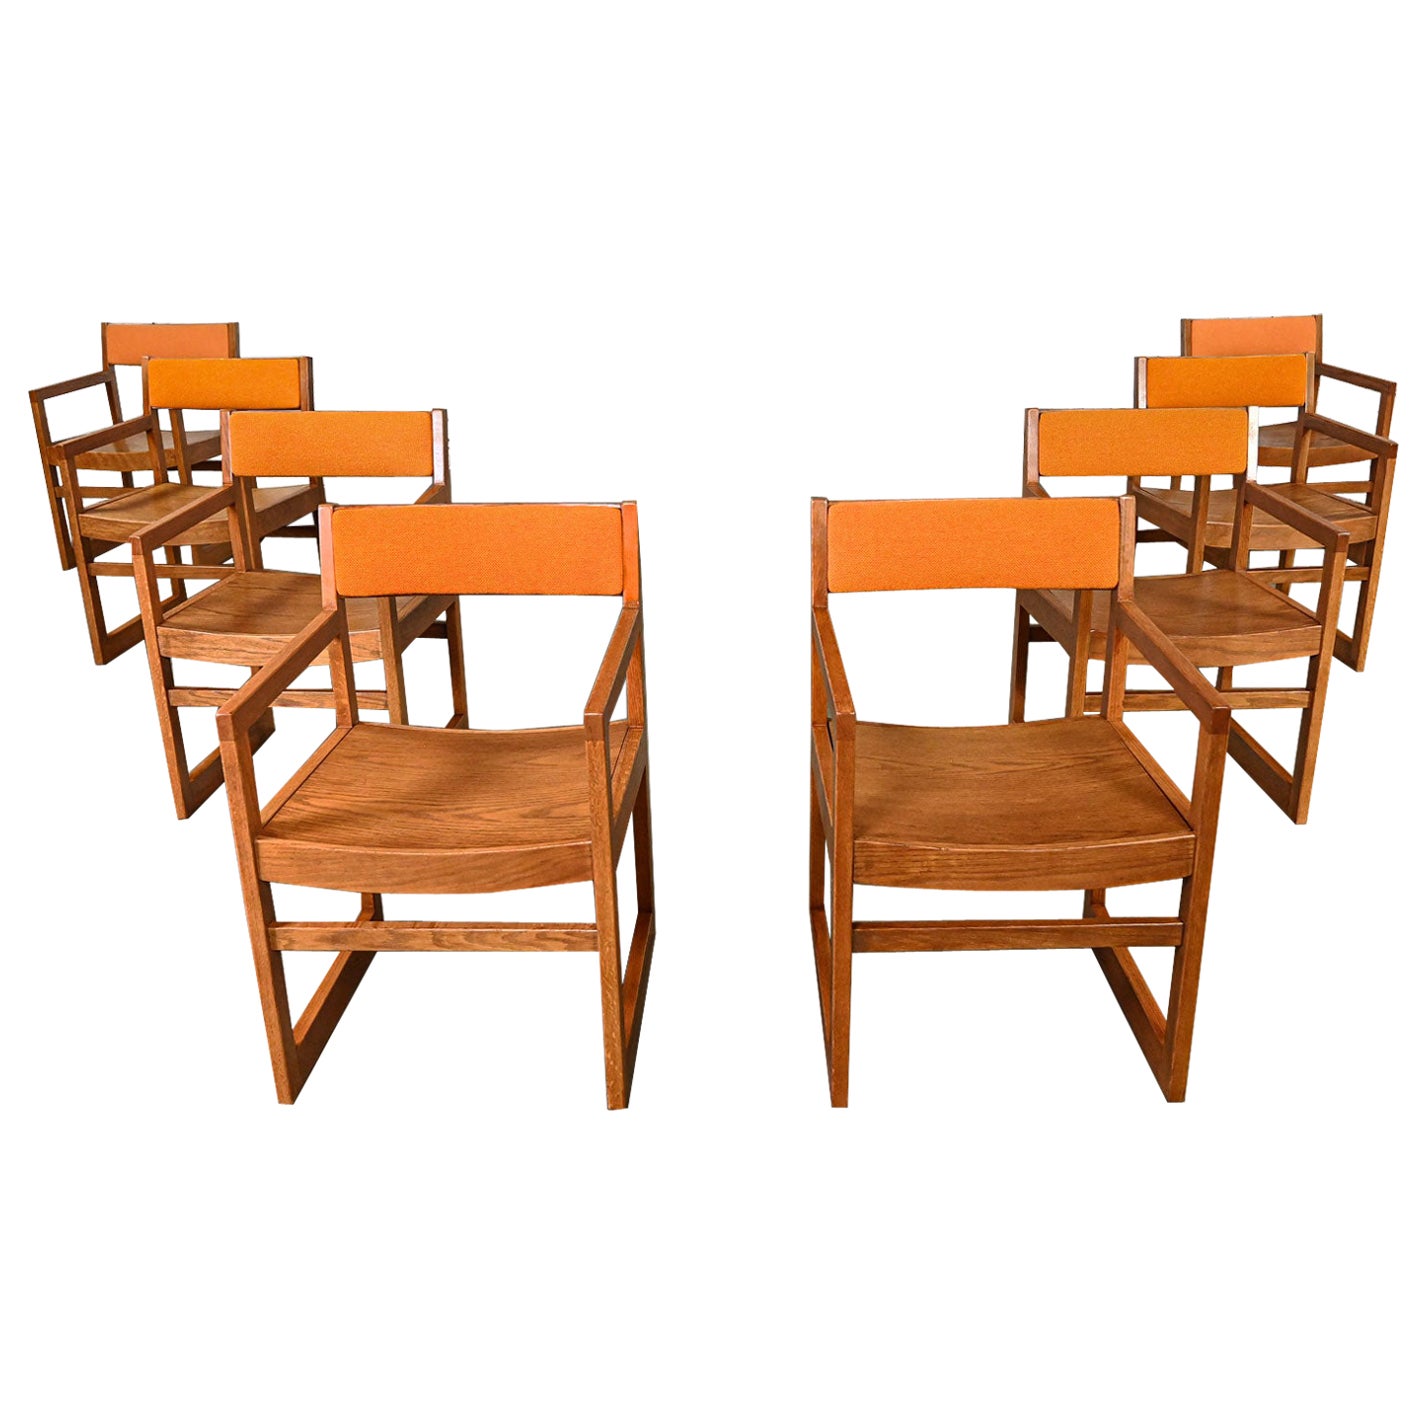 1970s Modern Dining Chairs Jasper Chair Co Orange Tweed Bentwood Seats Set of 8 For Sale